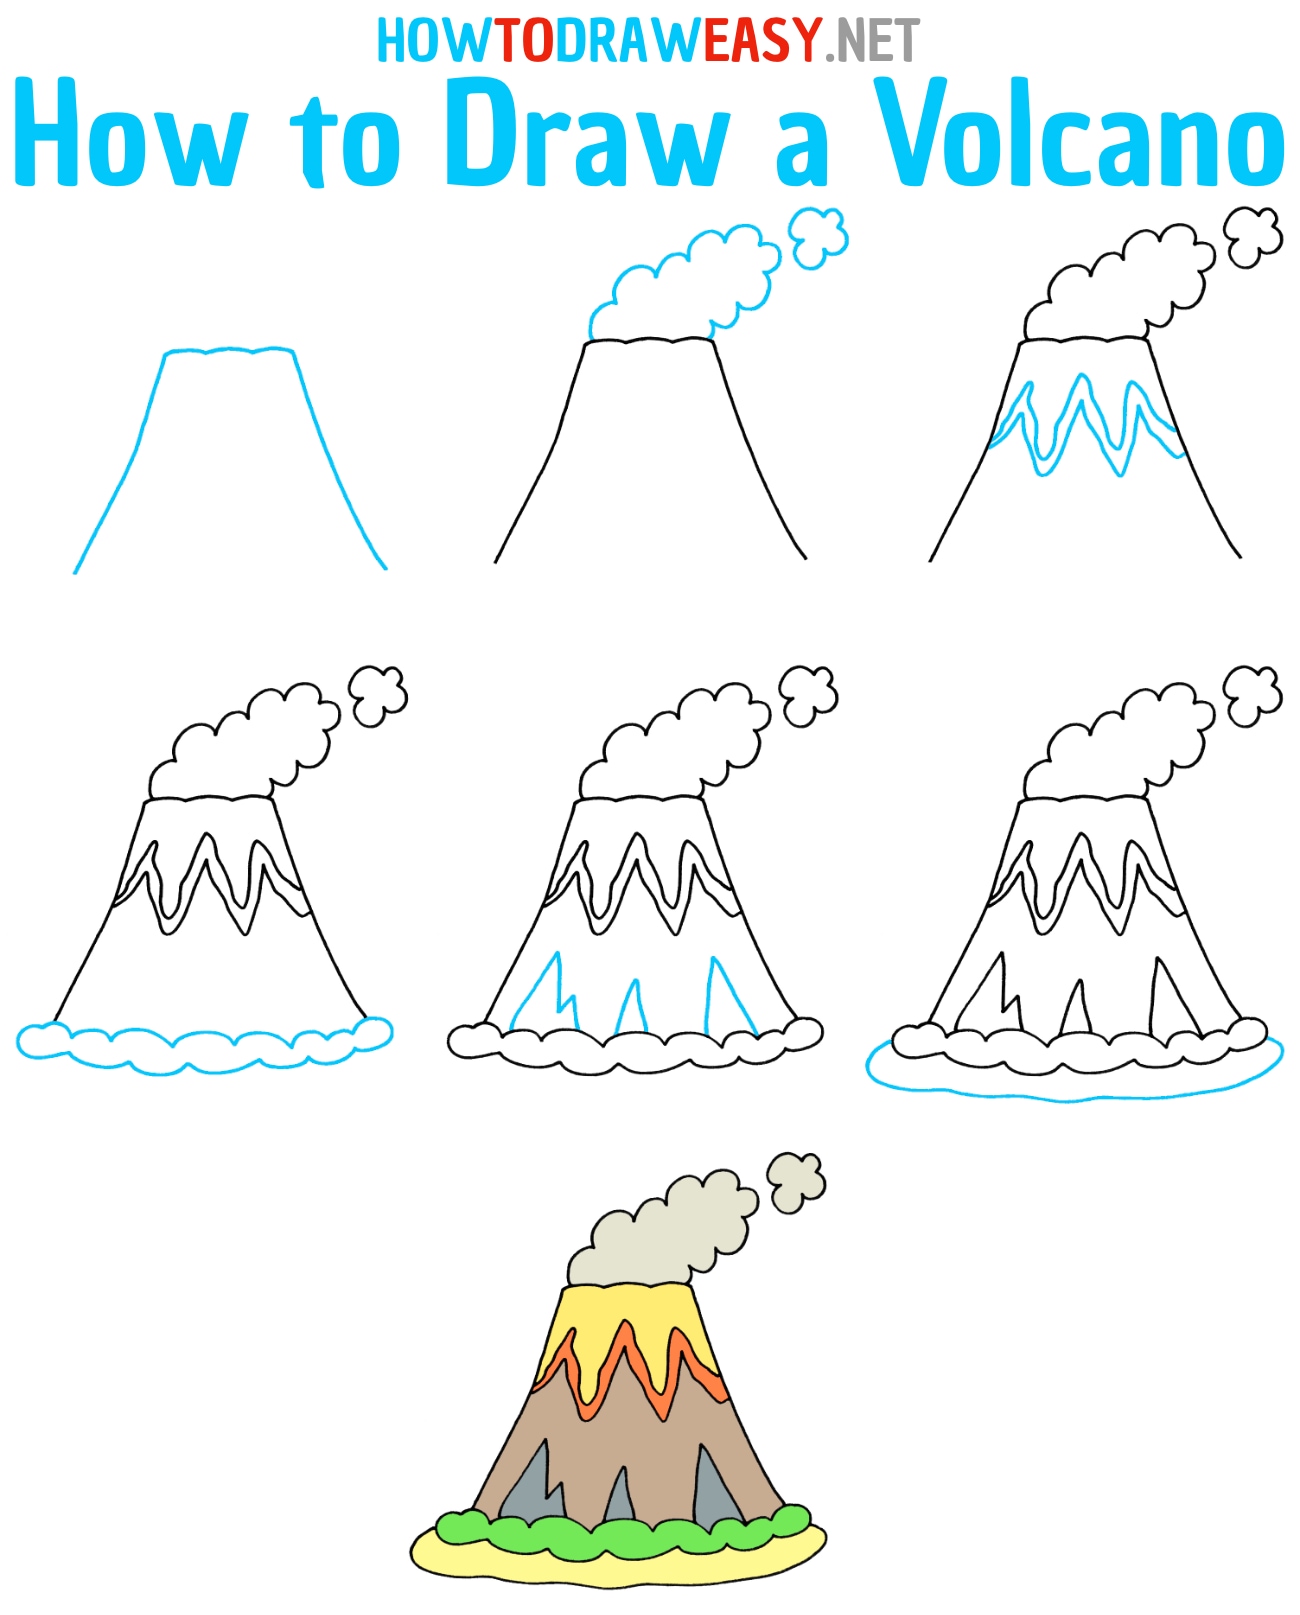 How to Draw a Volcano Step by Step